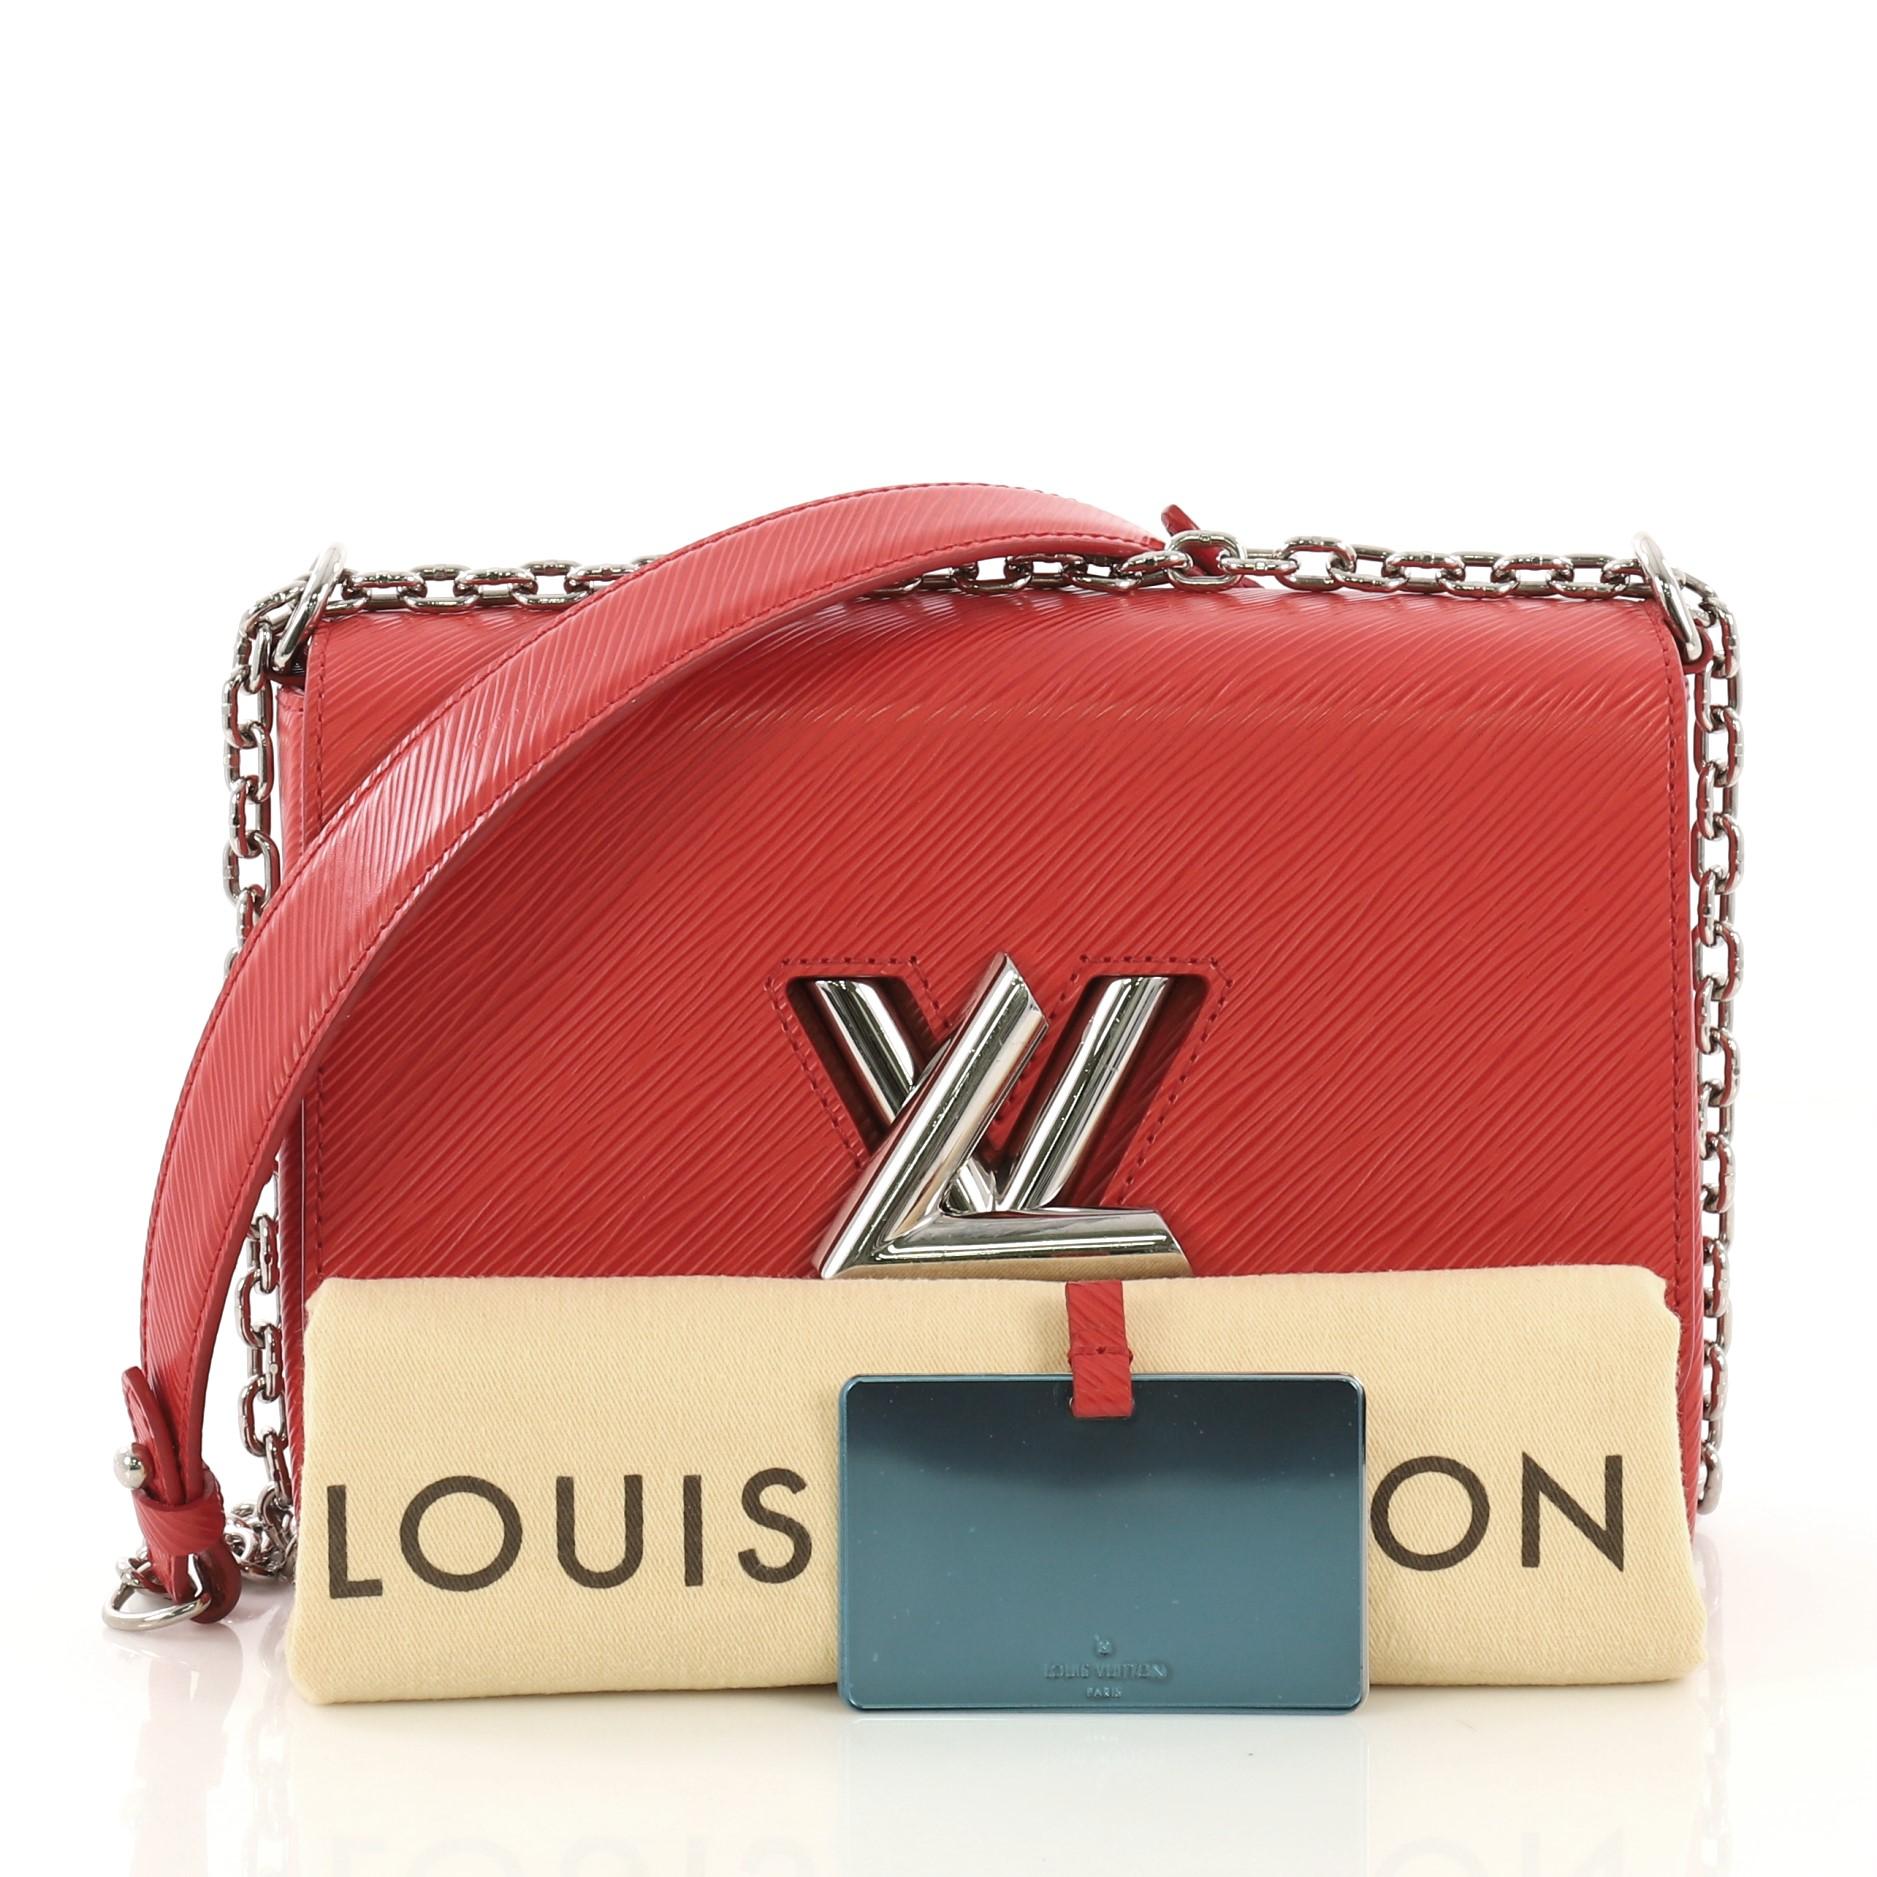 This Louis Vuitton Twist Handbag Epi Leather MM, crafted from red epi leather, features chain link strap with leather pad, frontal flap, and silver-tone hardware. Its LV twist lock closure opens to a light purple microfiber interior with slip